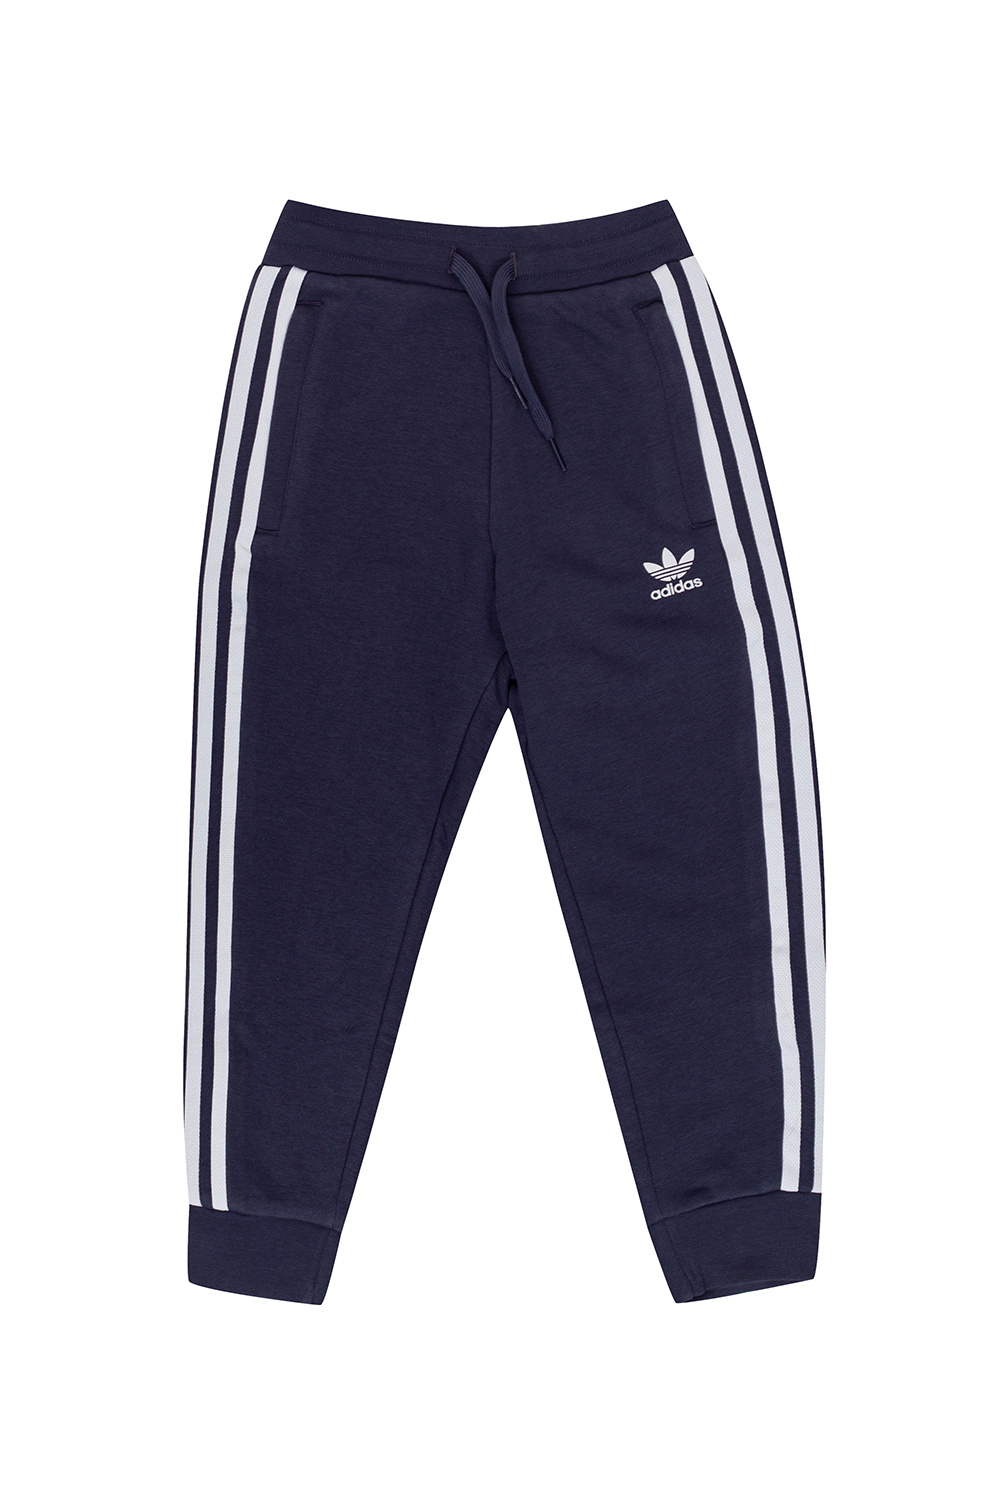 make it flat Medic Remarkable Kids's Boys clothes (4 | adidas cf3489 pants shoes made in america - 14  years) | StclaircomoShops | ADIDAS Kids Sweatsuit with logo